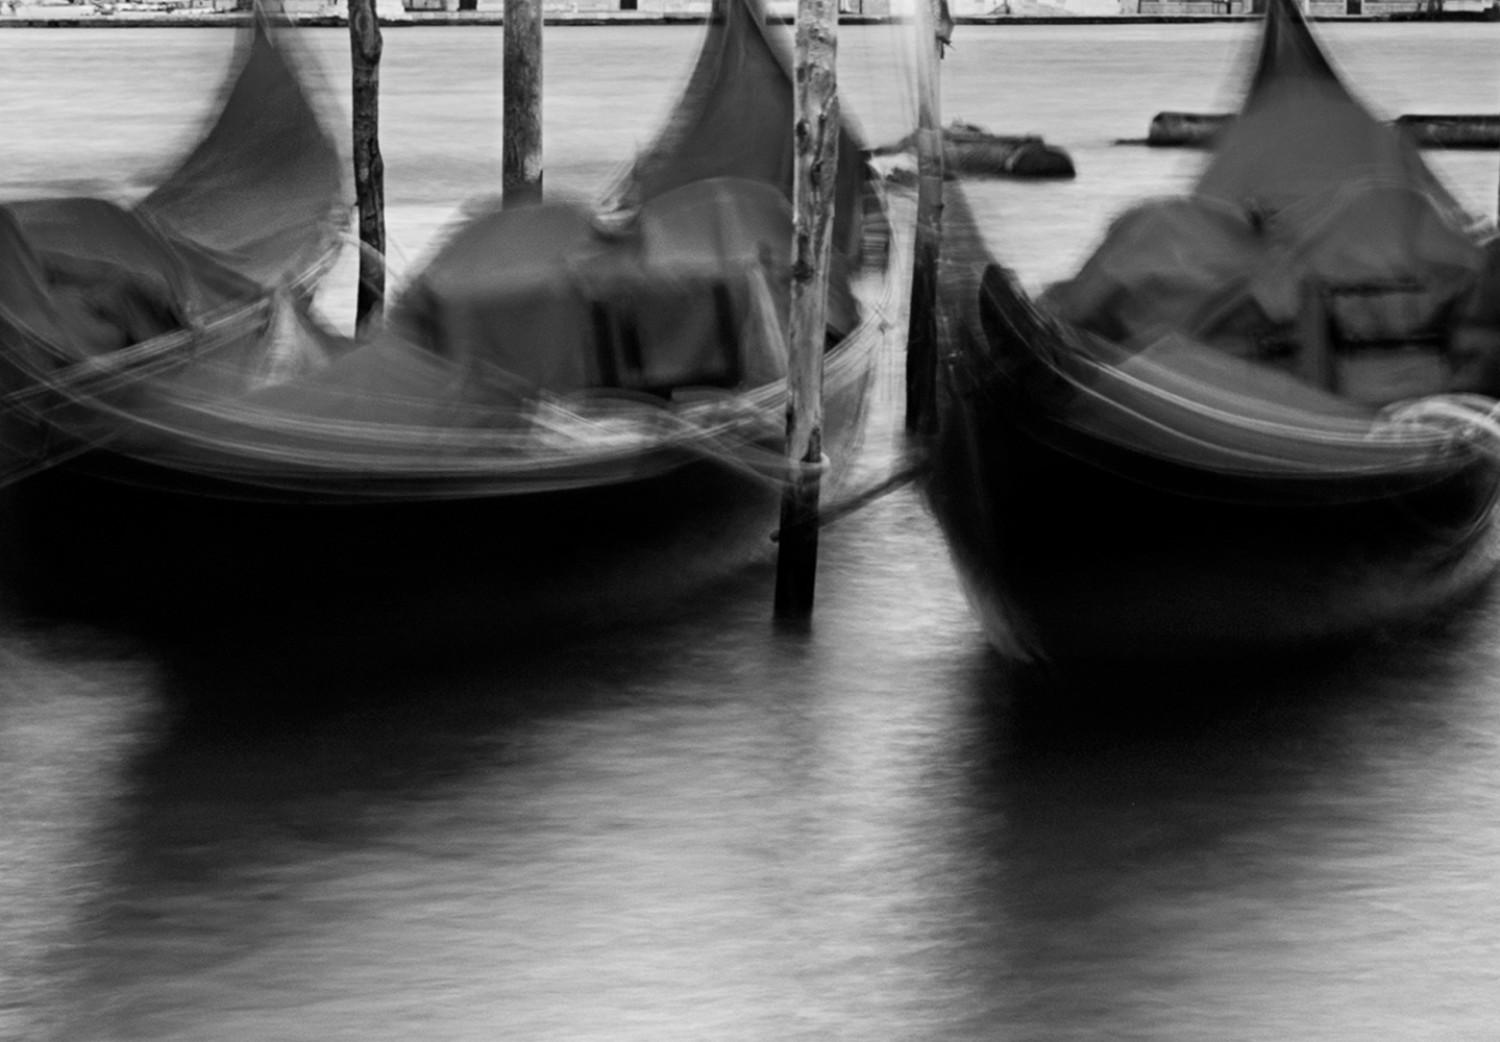 Gallery wall Boats in Venice - black and white riverscape with view of the river and gondolas